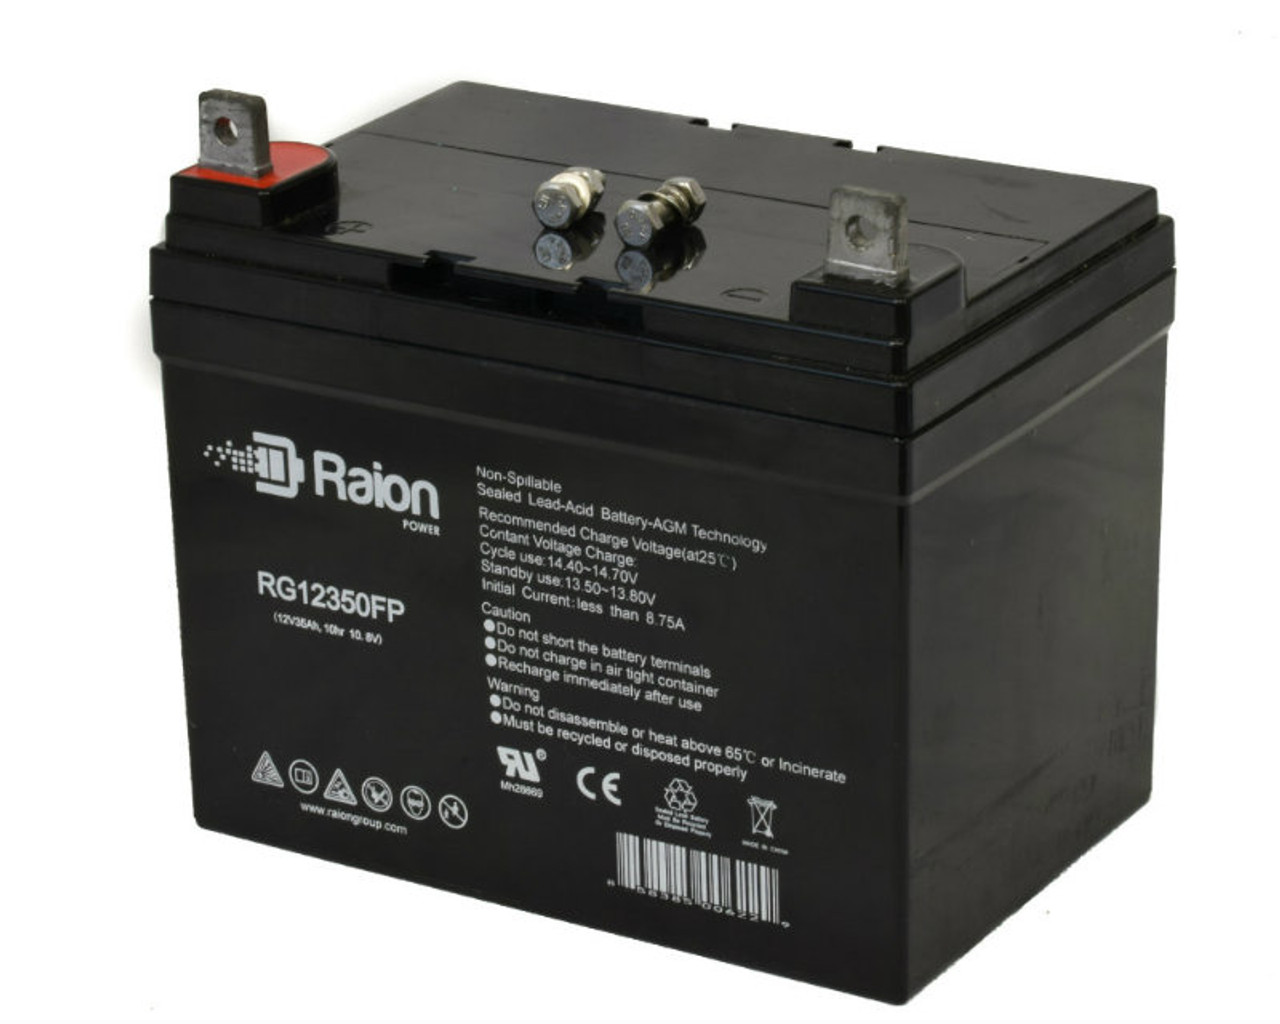 Raion Power Replacement 12V 35Ah RG12350FP Mobility Scooter Battery for Chauffeur Mobility Chauffeur Scooters C-Series